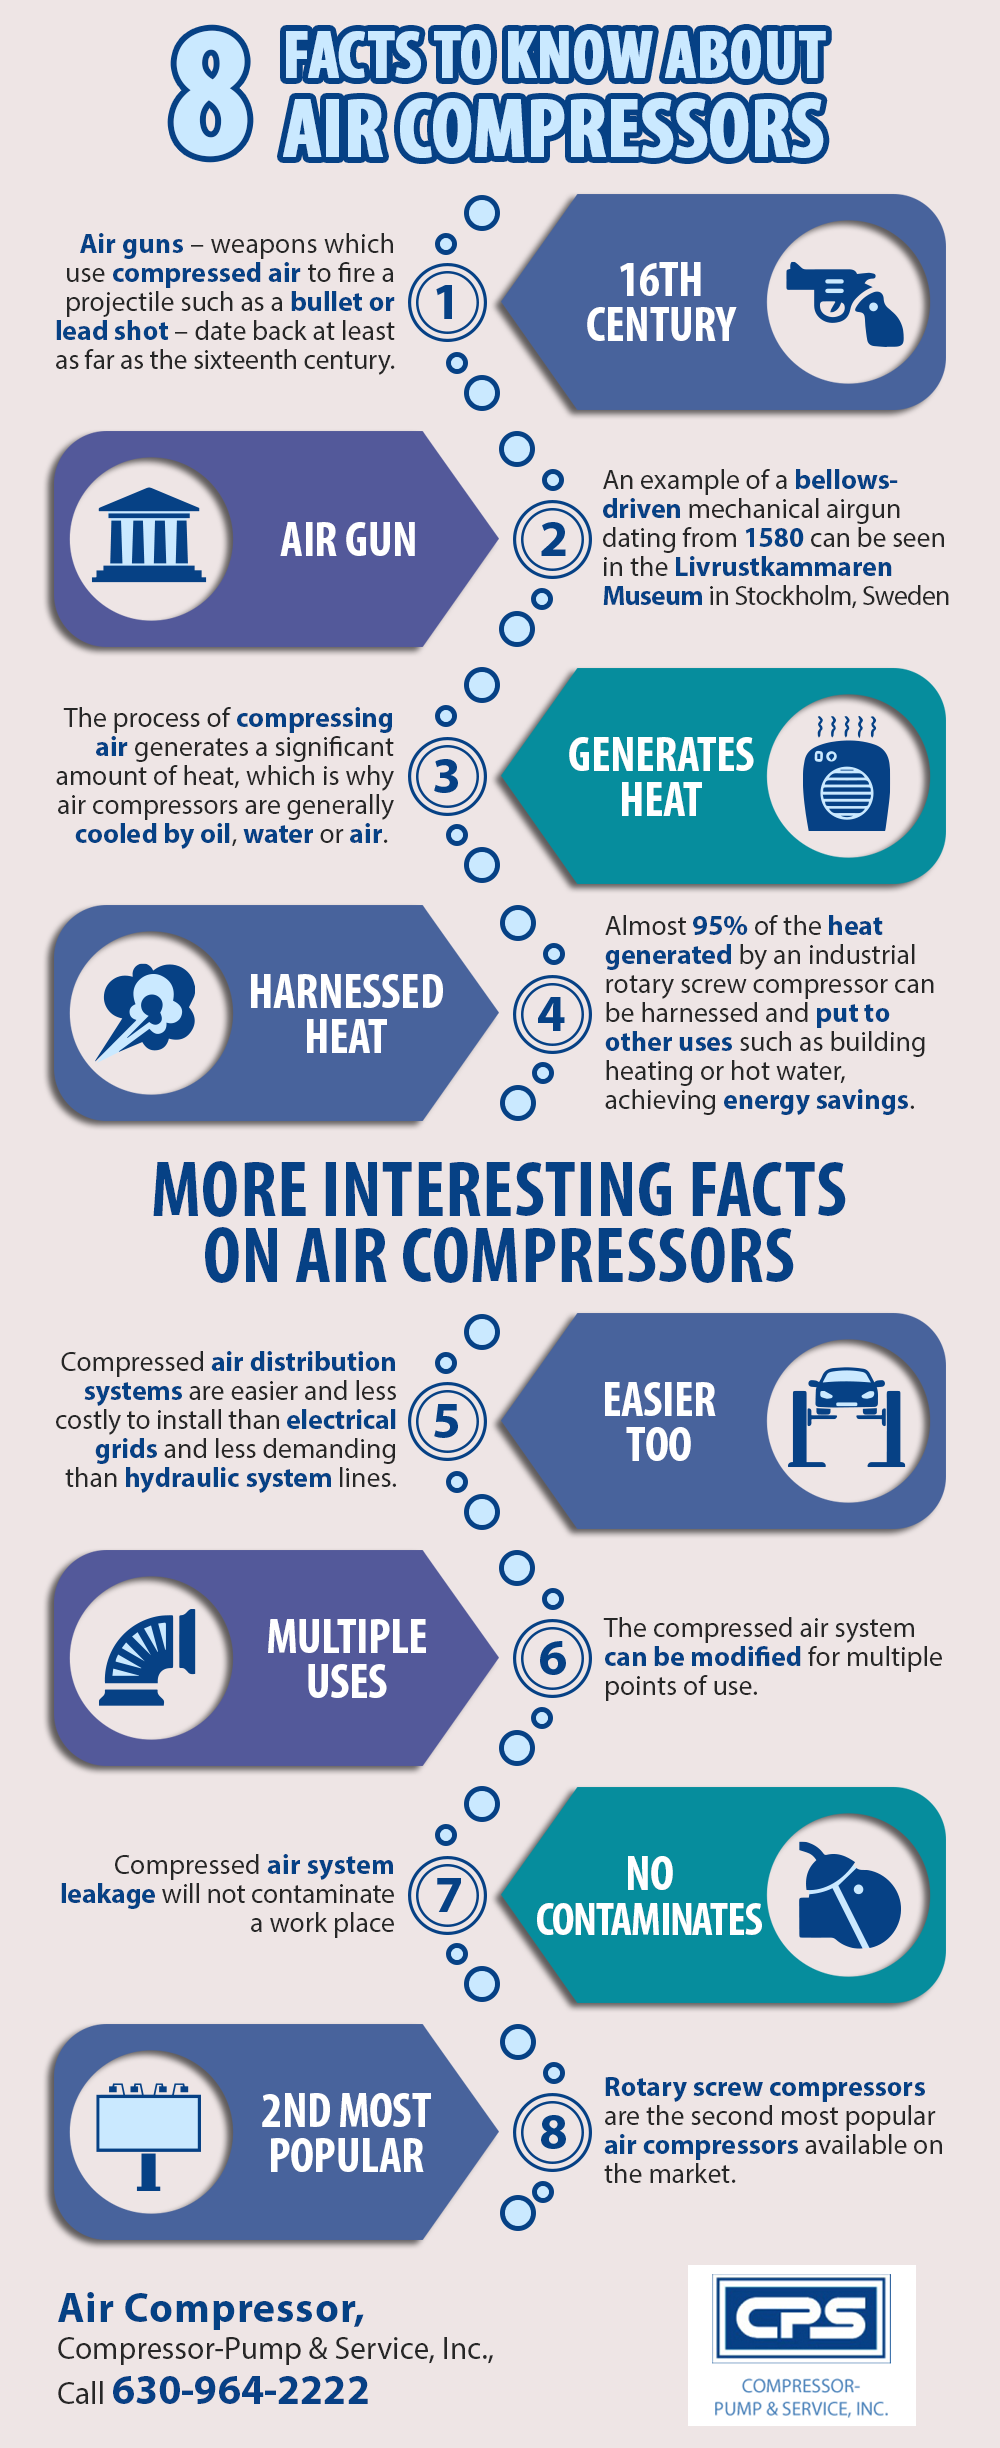 8 Facts to Know About Air Compressors | Shared Info Graphics